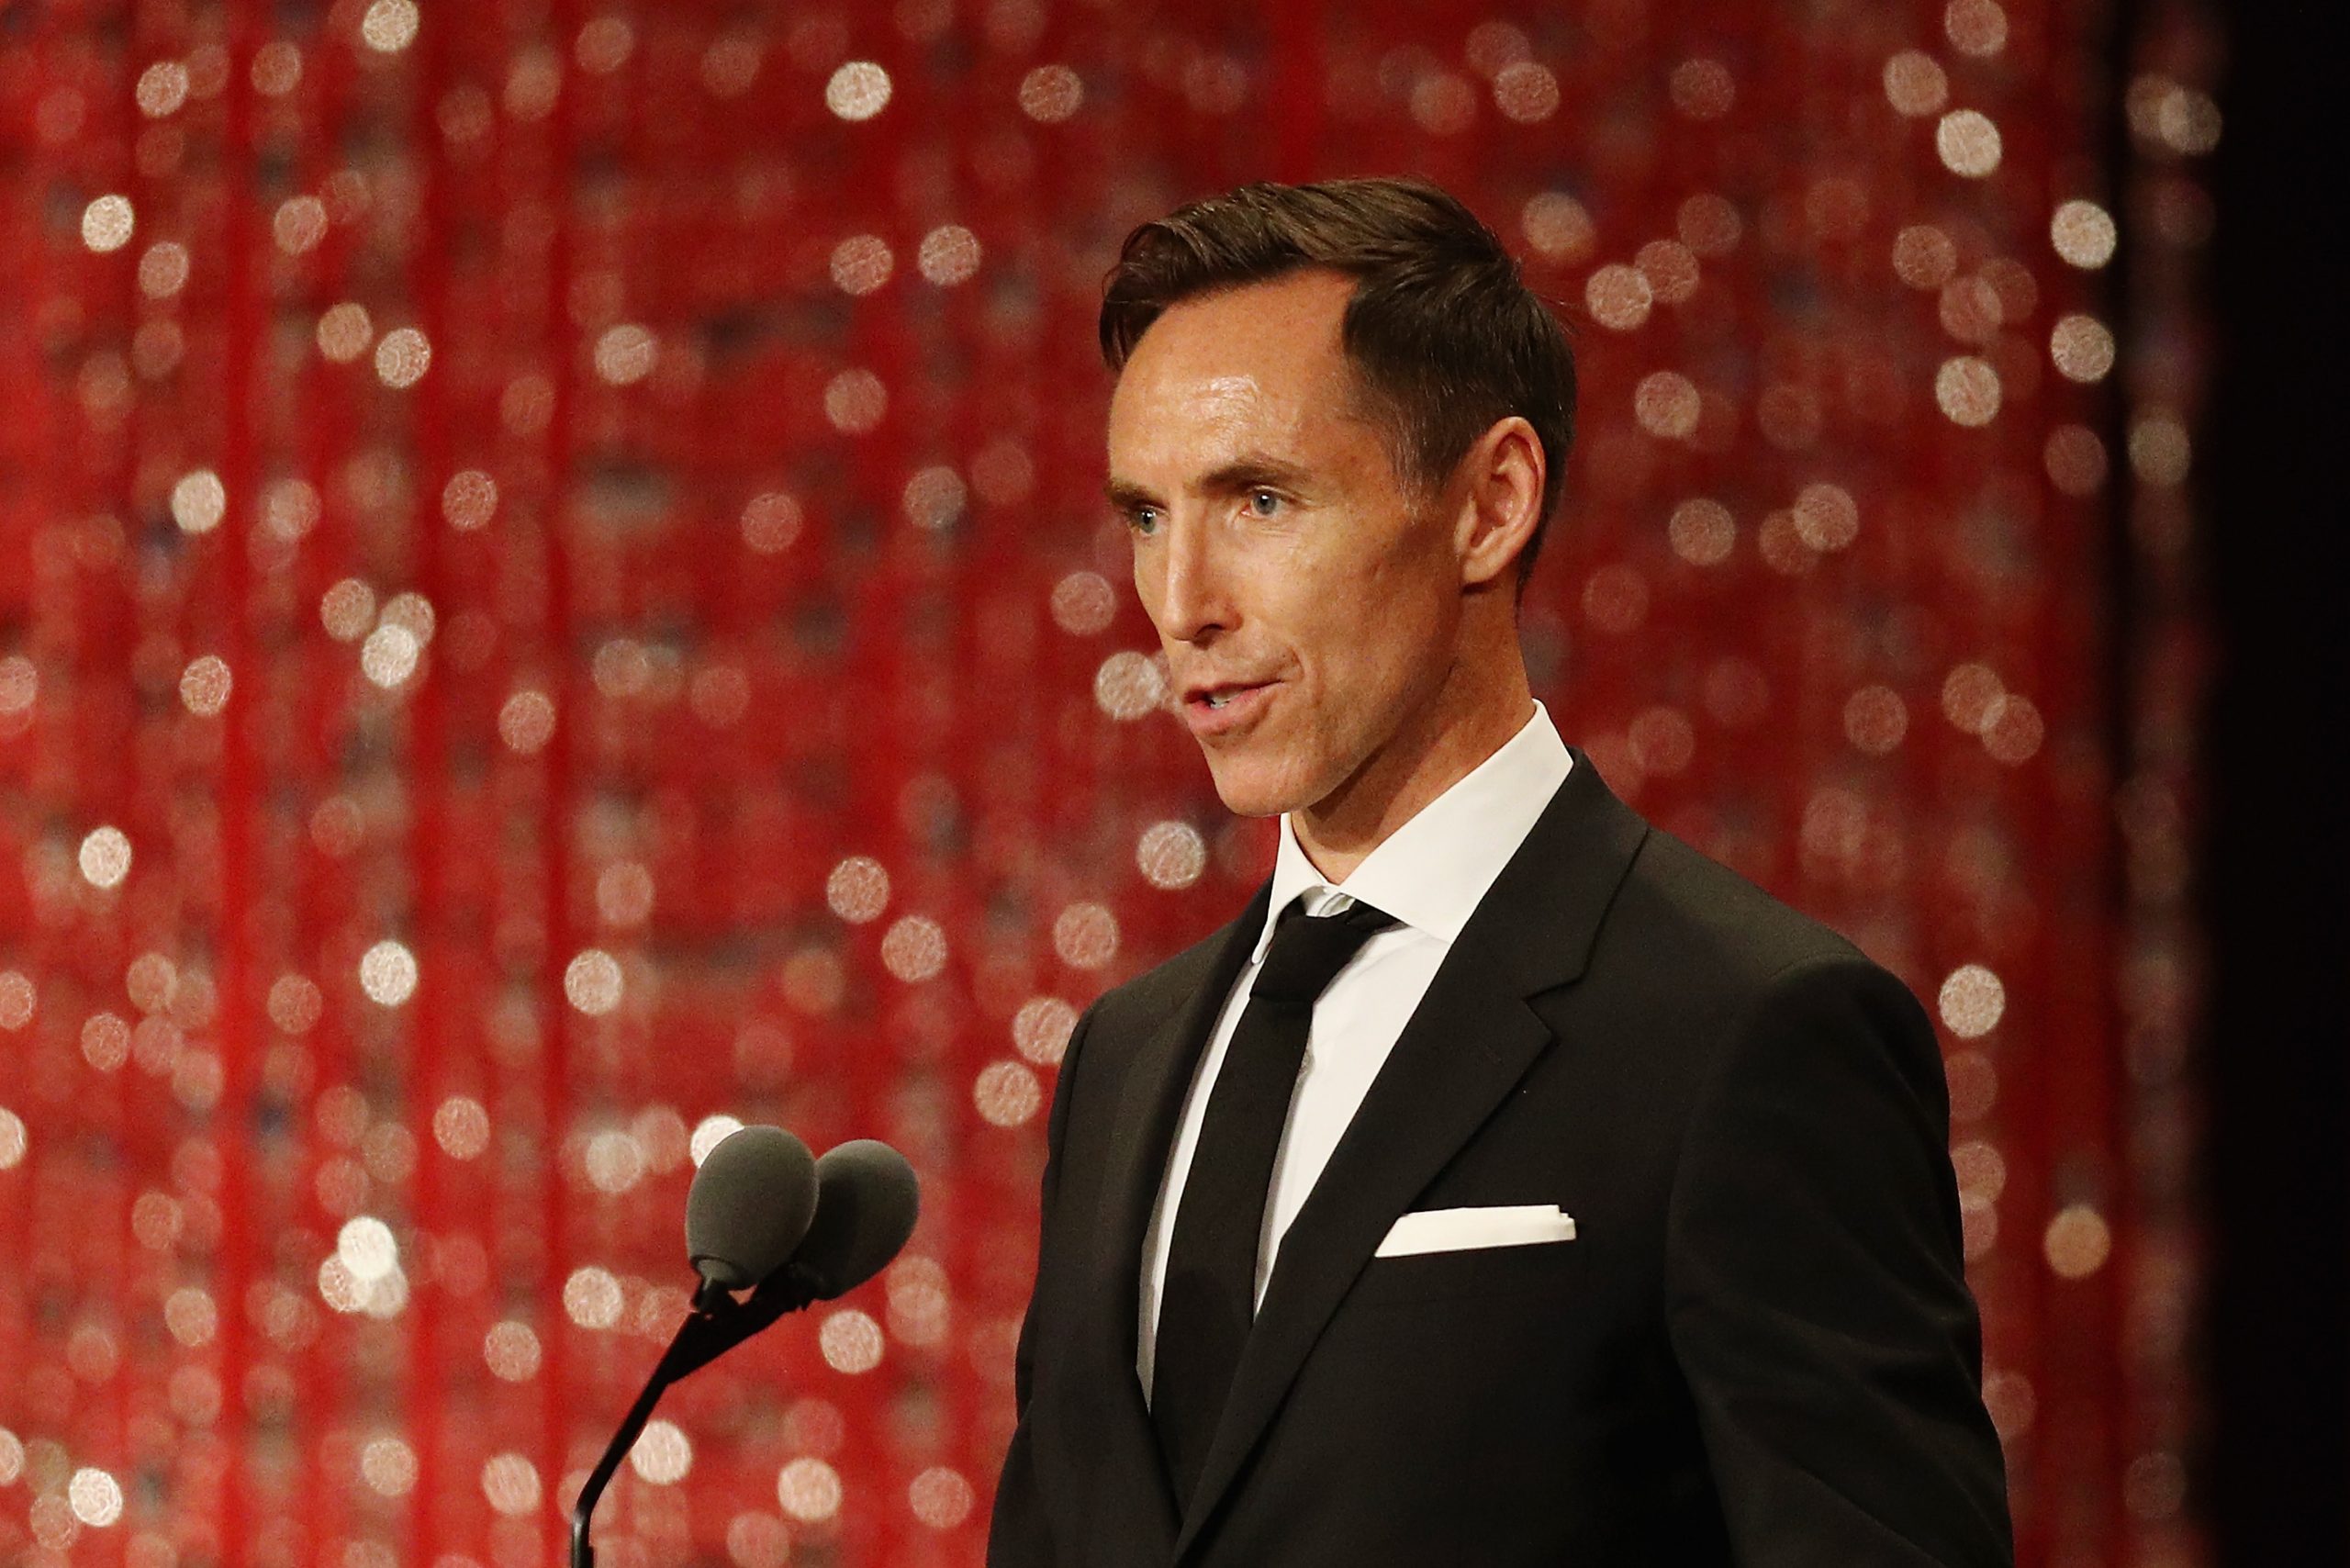 Steve Nash was appointed by the Brooklyn Nets